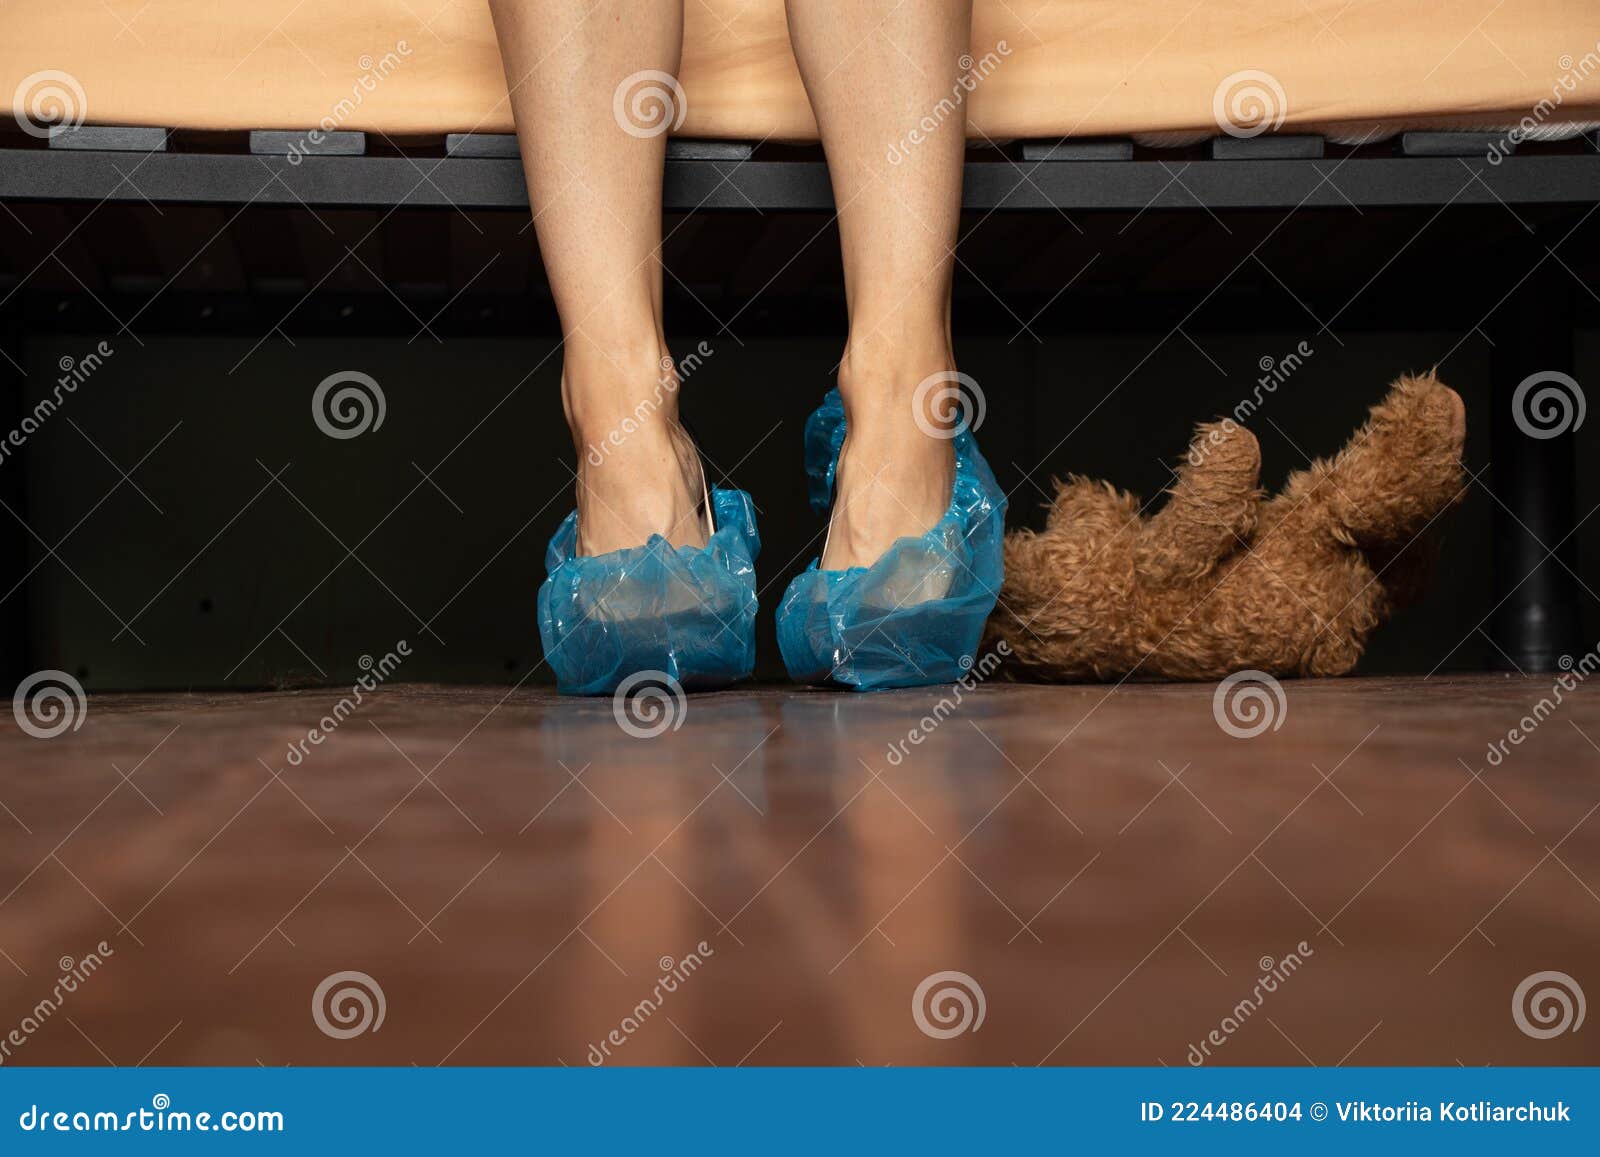 A Girl in Black High-heeled Shoes in Blue Shoe Covers on the Floor Laid the Bed Under the Bed is a Childrenand X27;s Teddy Bear Stock Photo